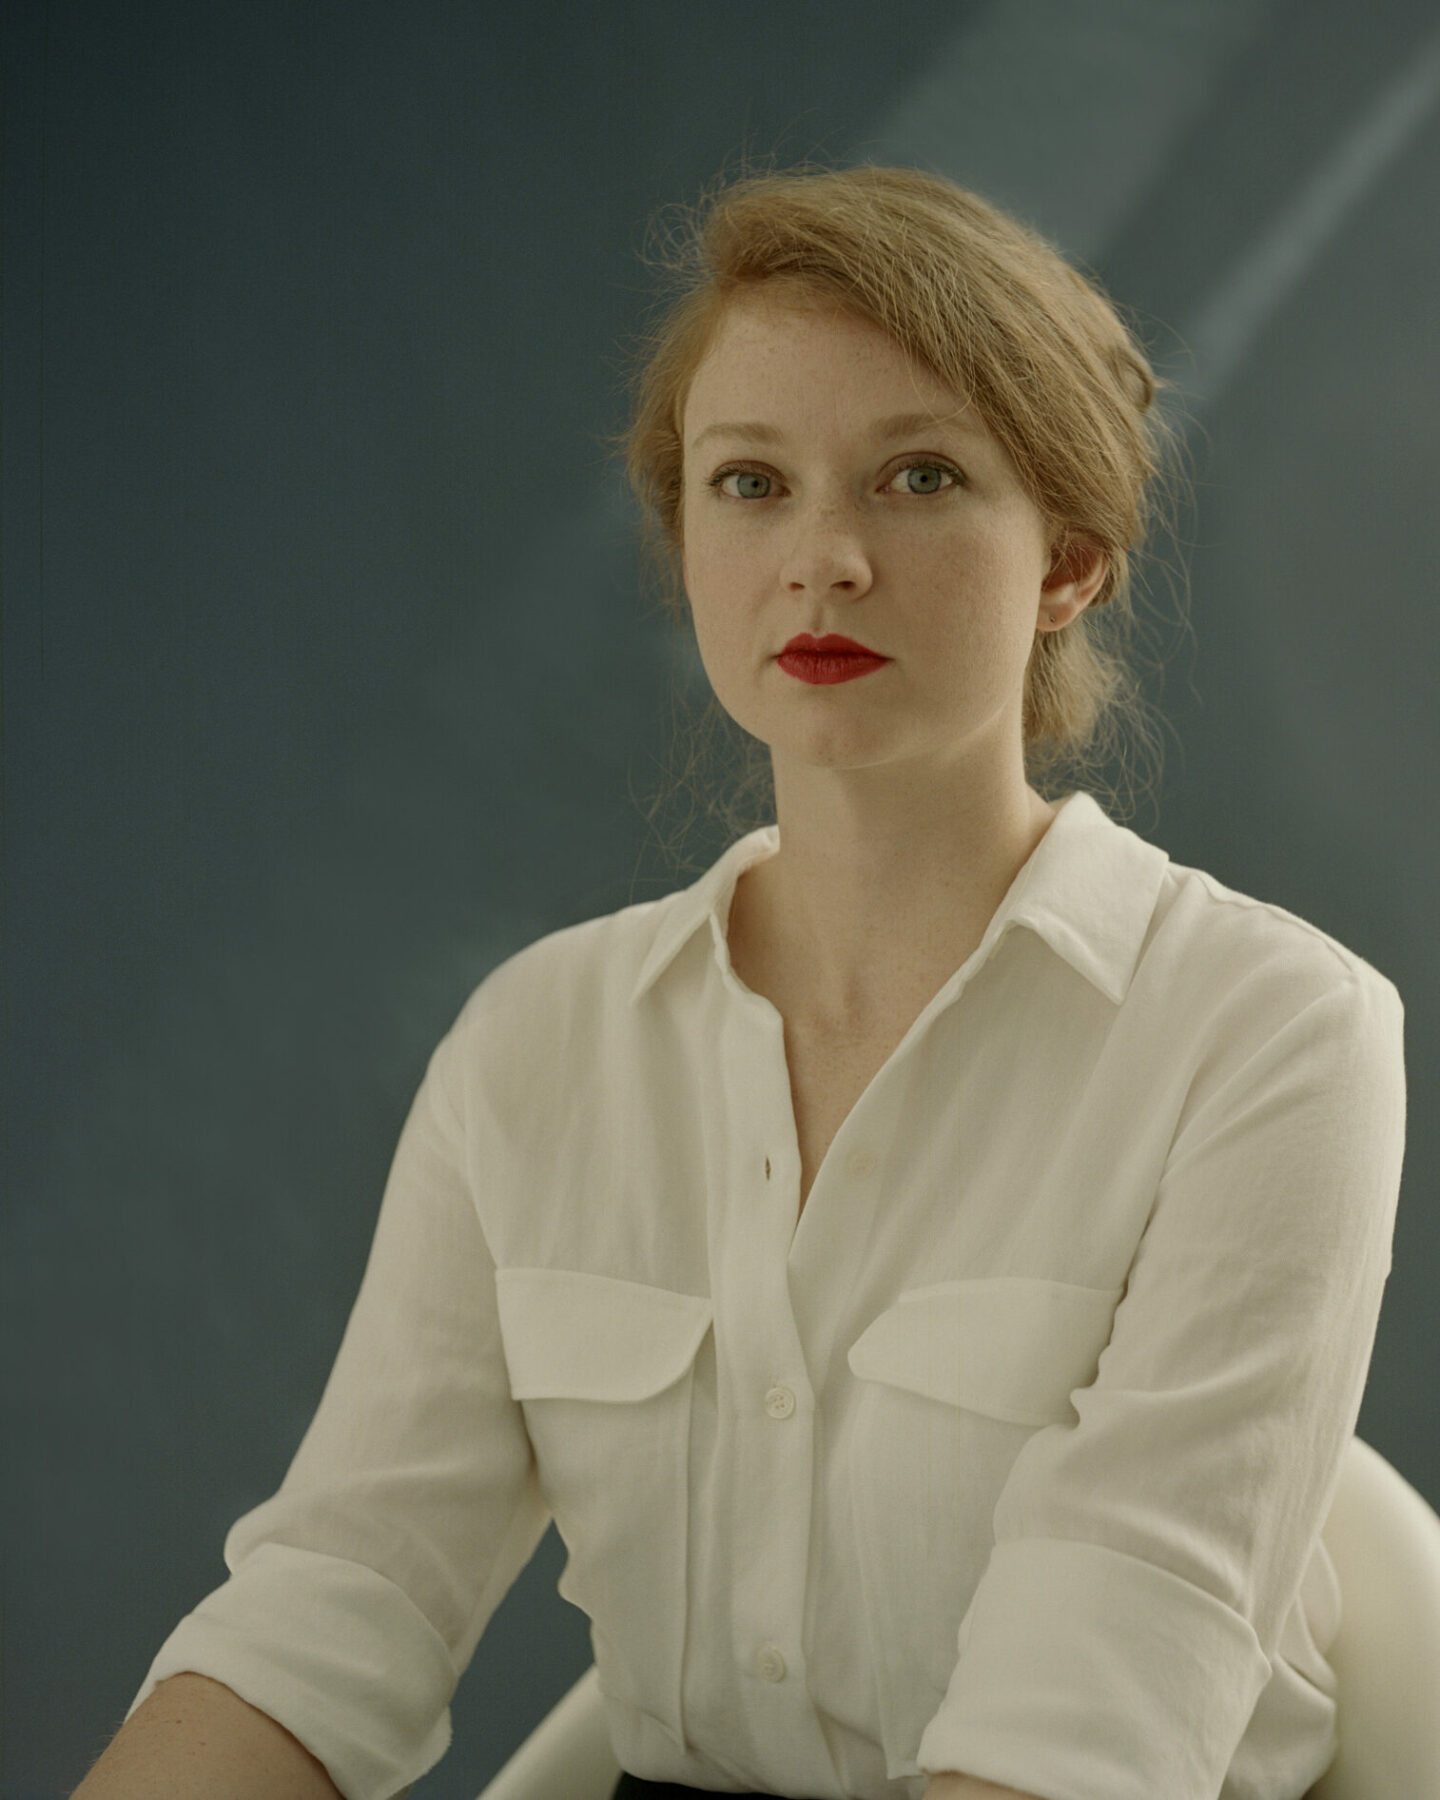 A strawberry-blonde woman with red lipstick and a white shirt sits up and looks directly at the camera